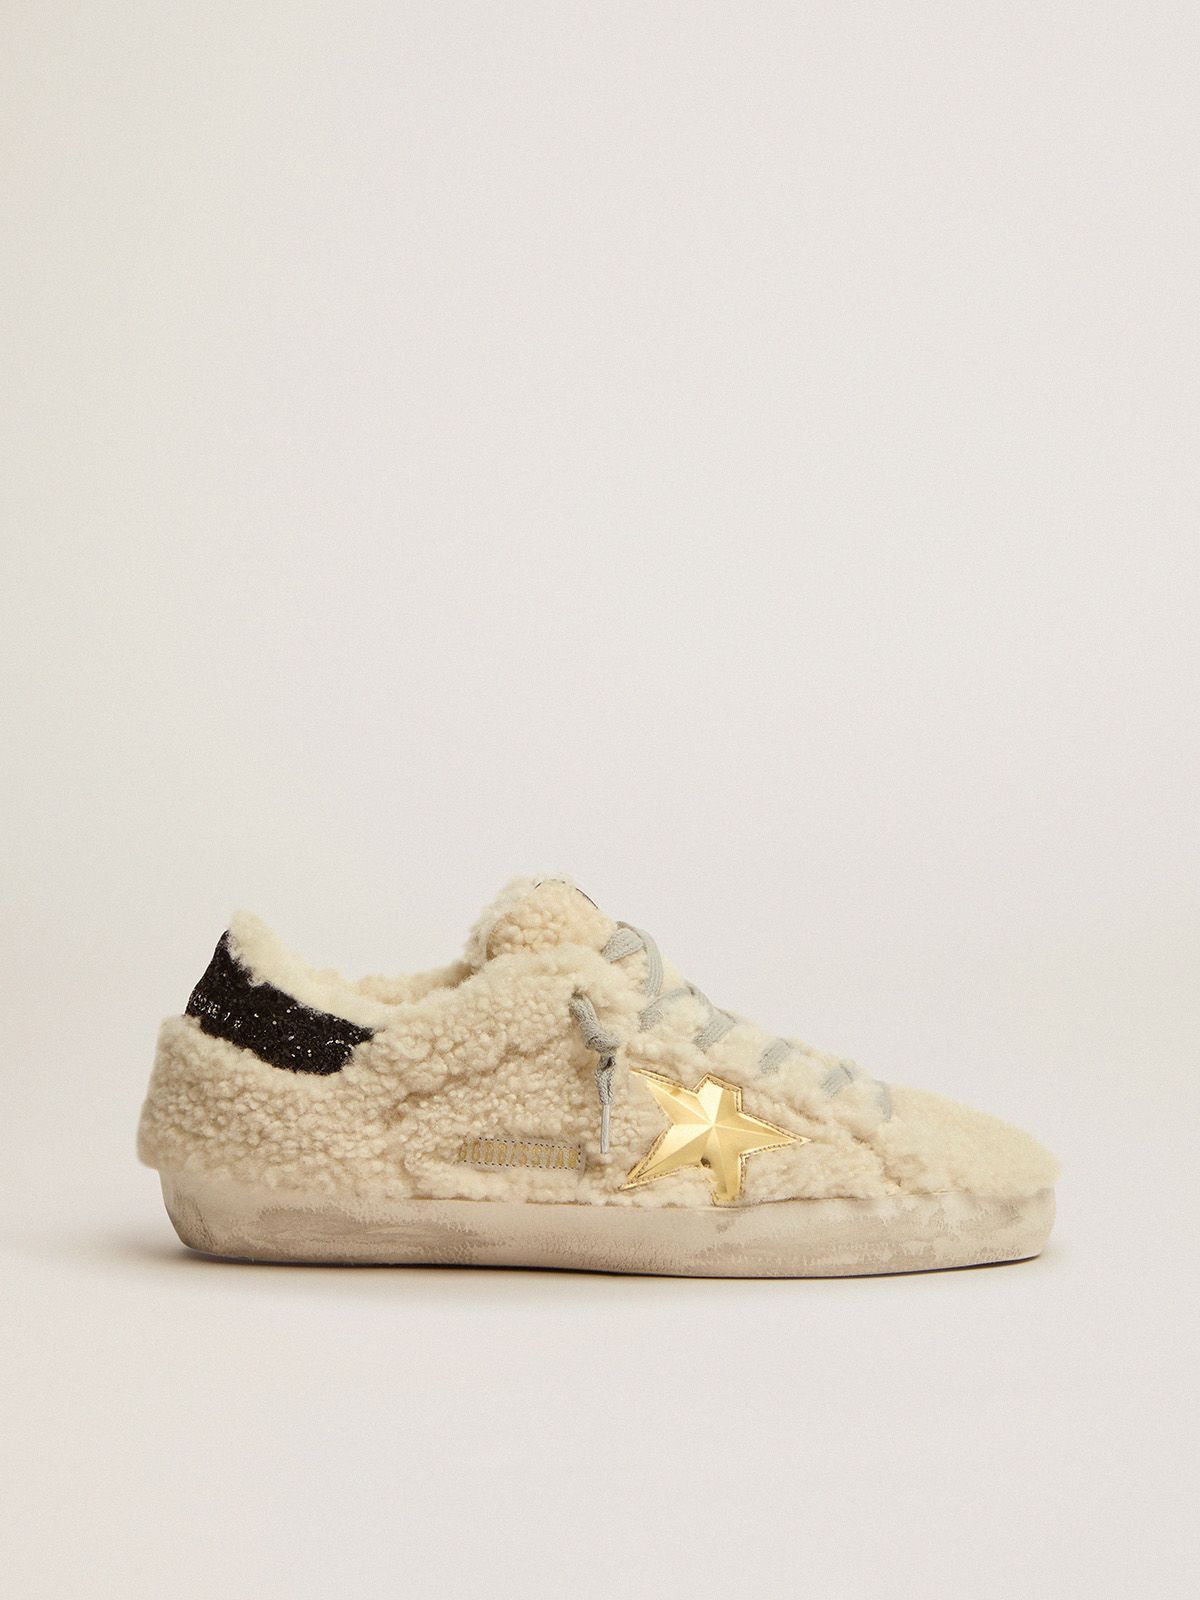 Super-Star sneakers in shearling with gold 3D star